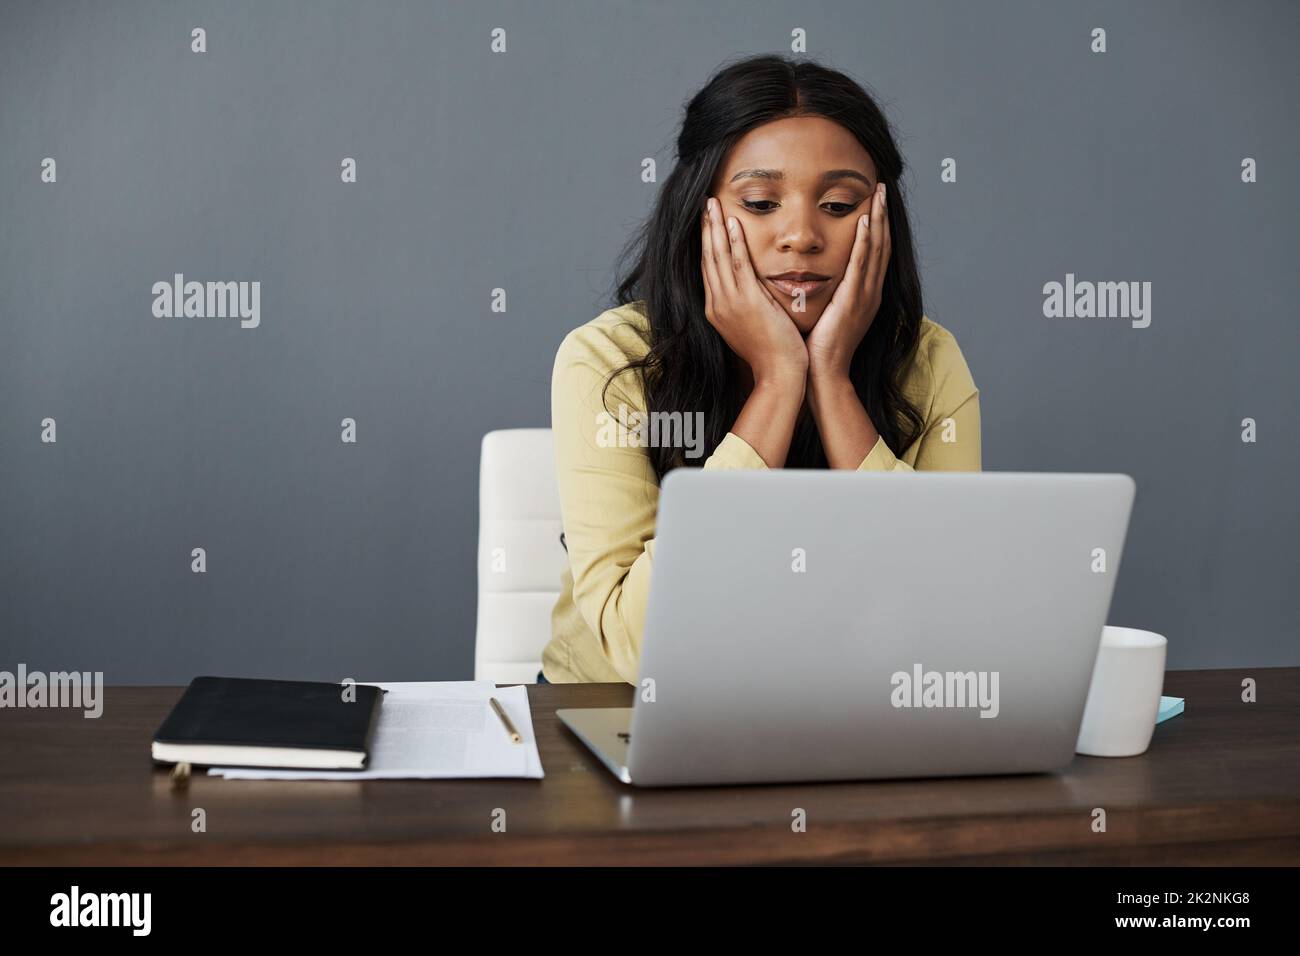 I need a jolt of excitement in my life. Shot of a young businesswoman looking bored at her desk. Stock Photo